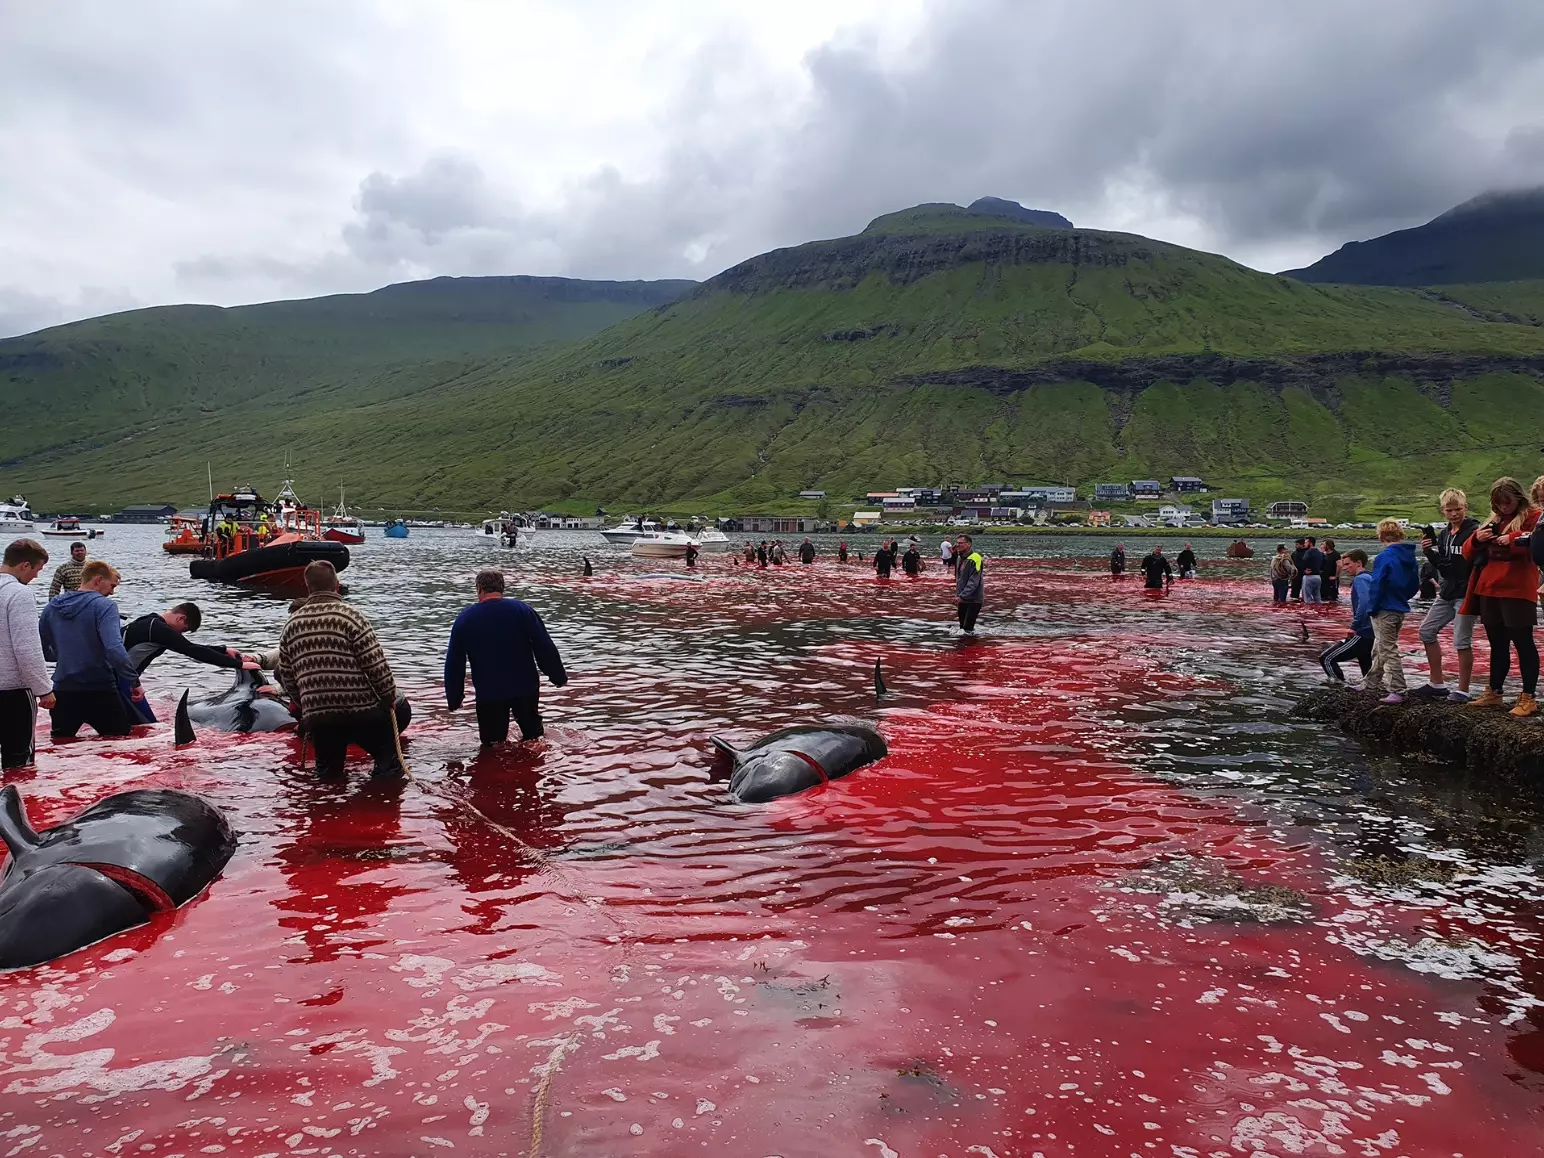 23 whales were killed.